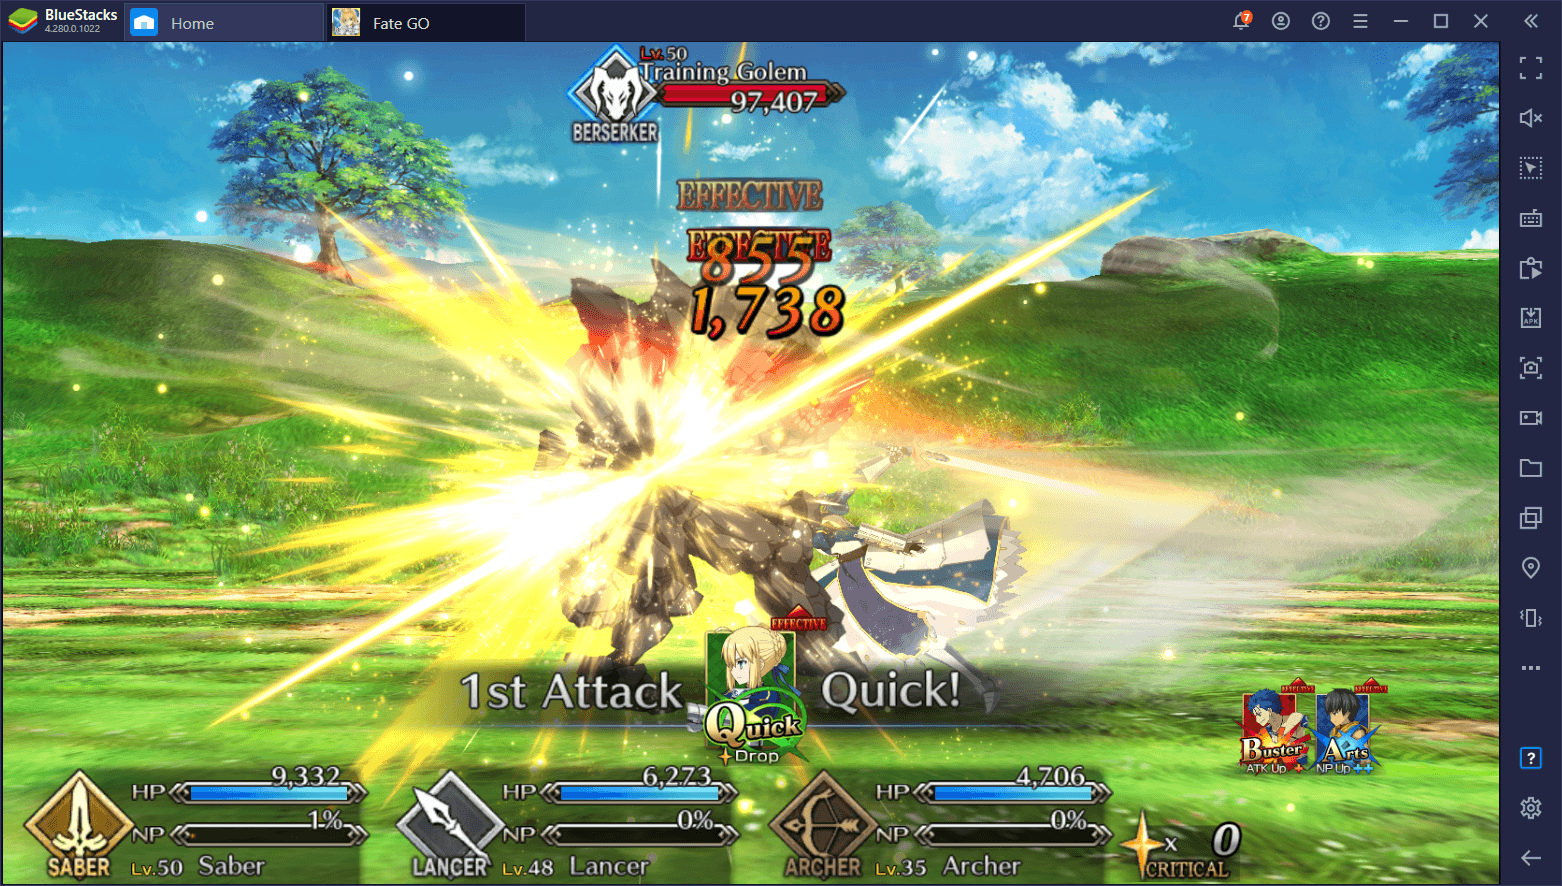 How to Install and Play Fate/Grand Order on PC with BlueStacks